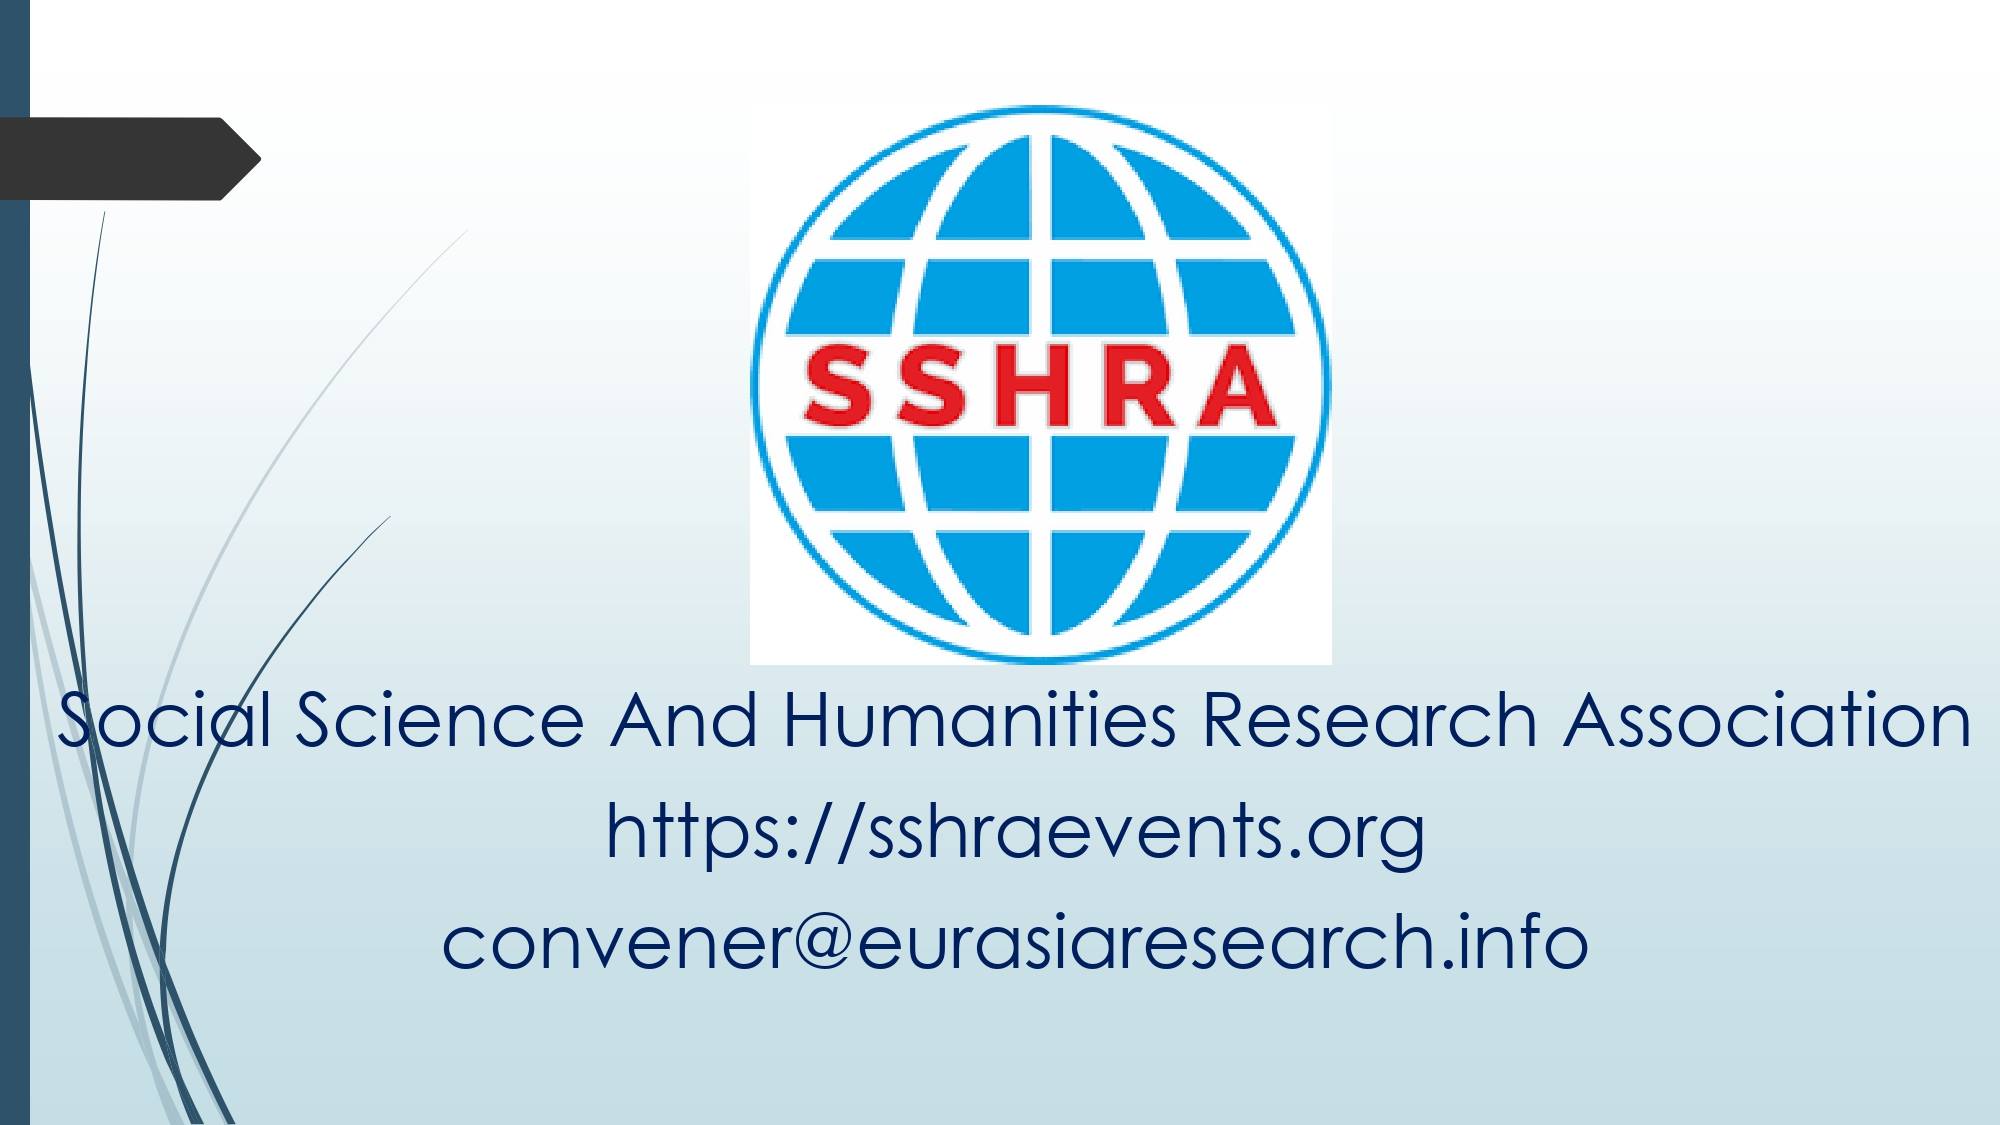 9th Singapore – International Conference on Social Science & Humanities (ICSSH), 16-17 November 2021, Singapore